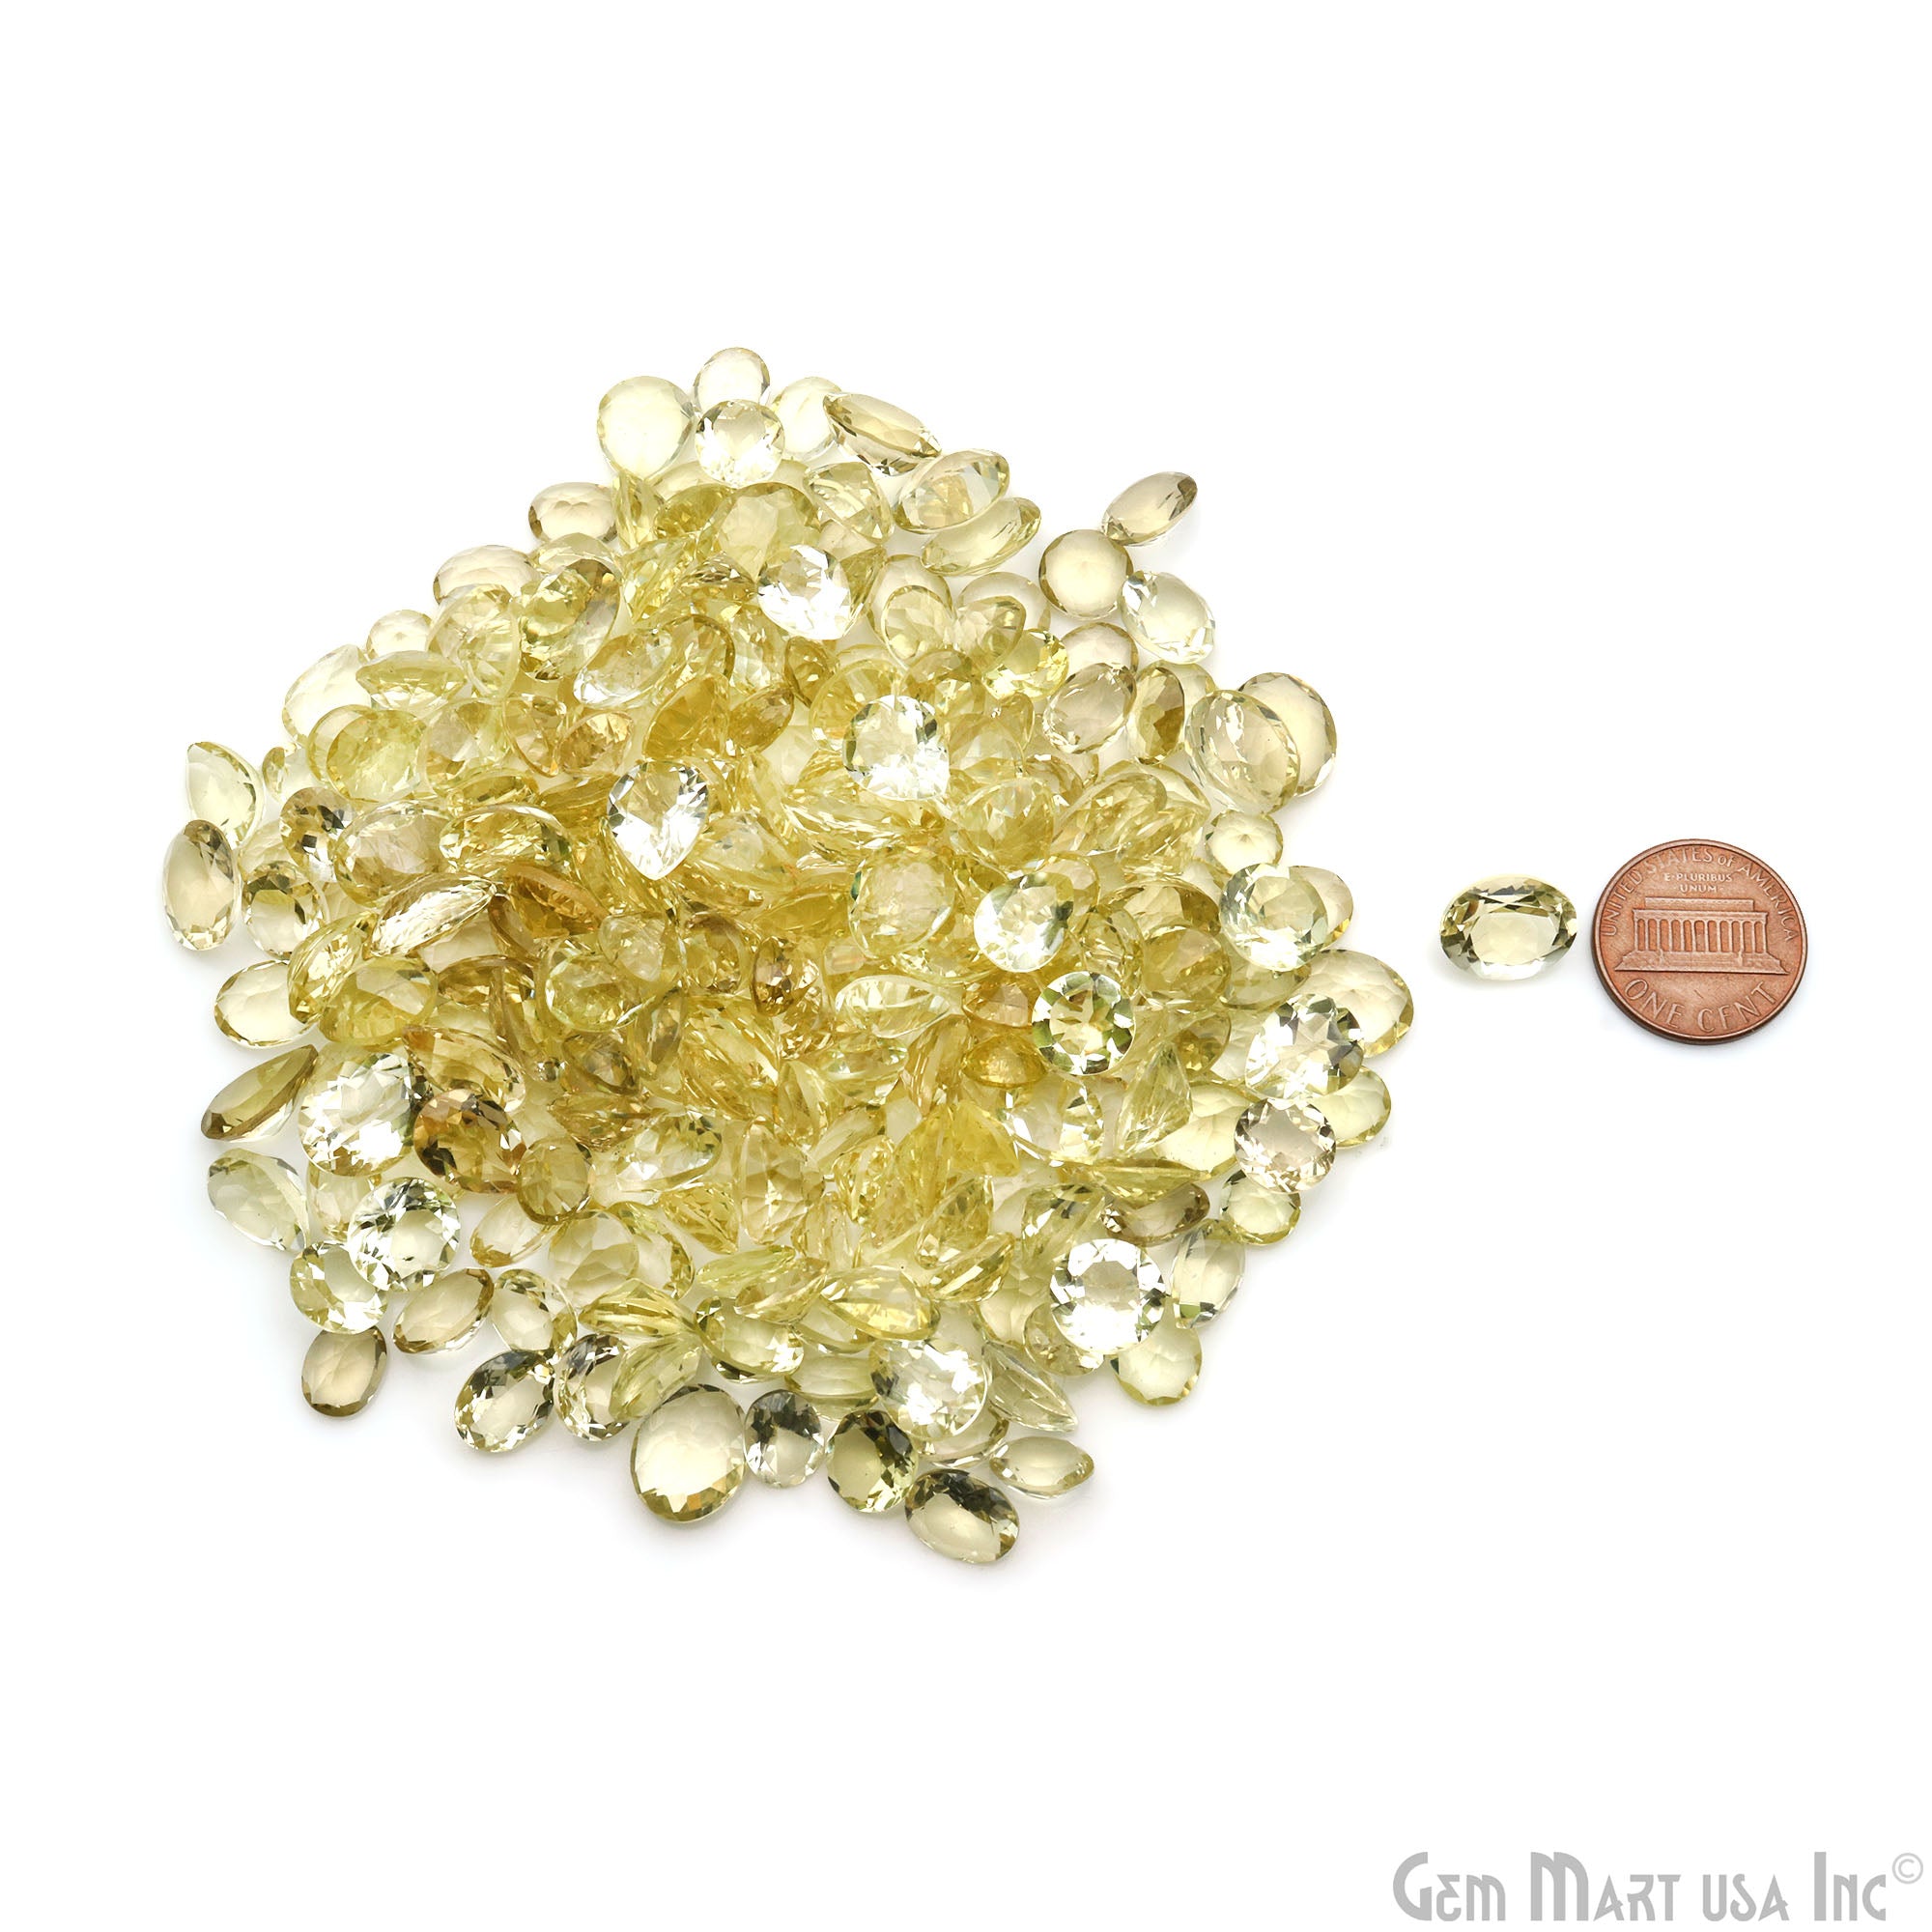 100ct Lemon Topaz Oval, Pear, Round Shape Mix Size Faceted Loose Gemstone